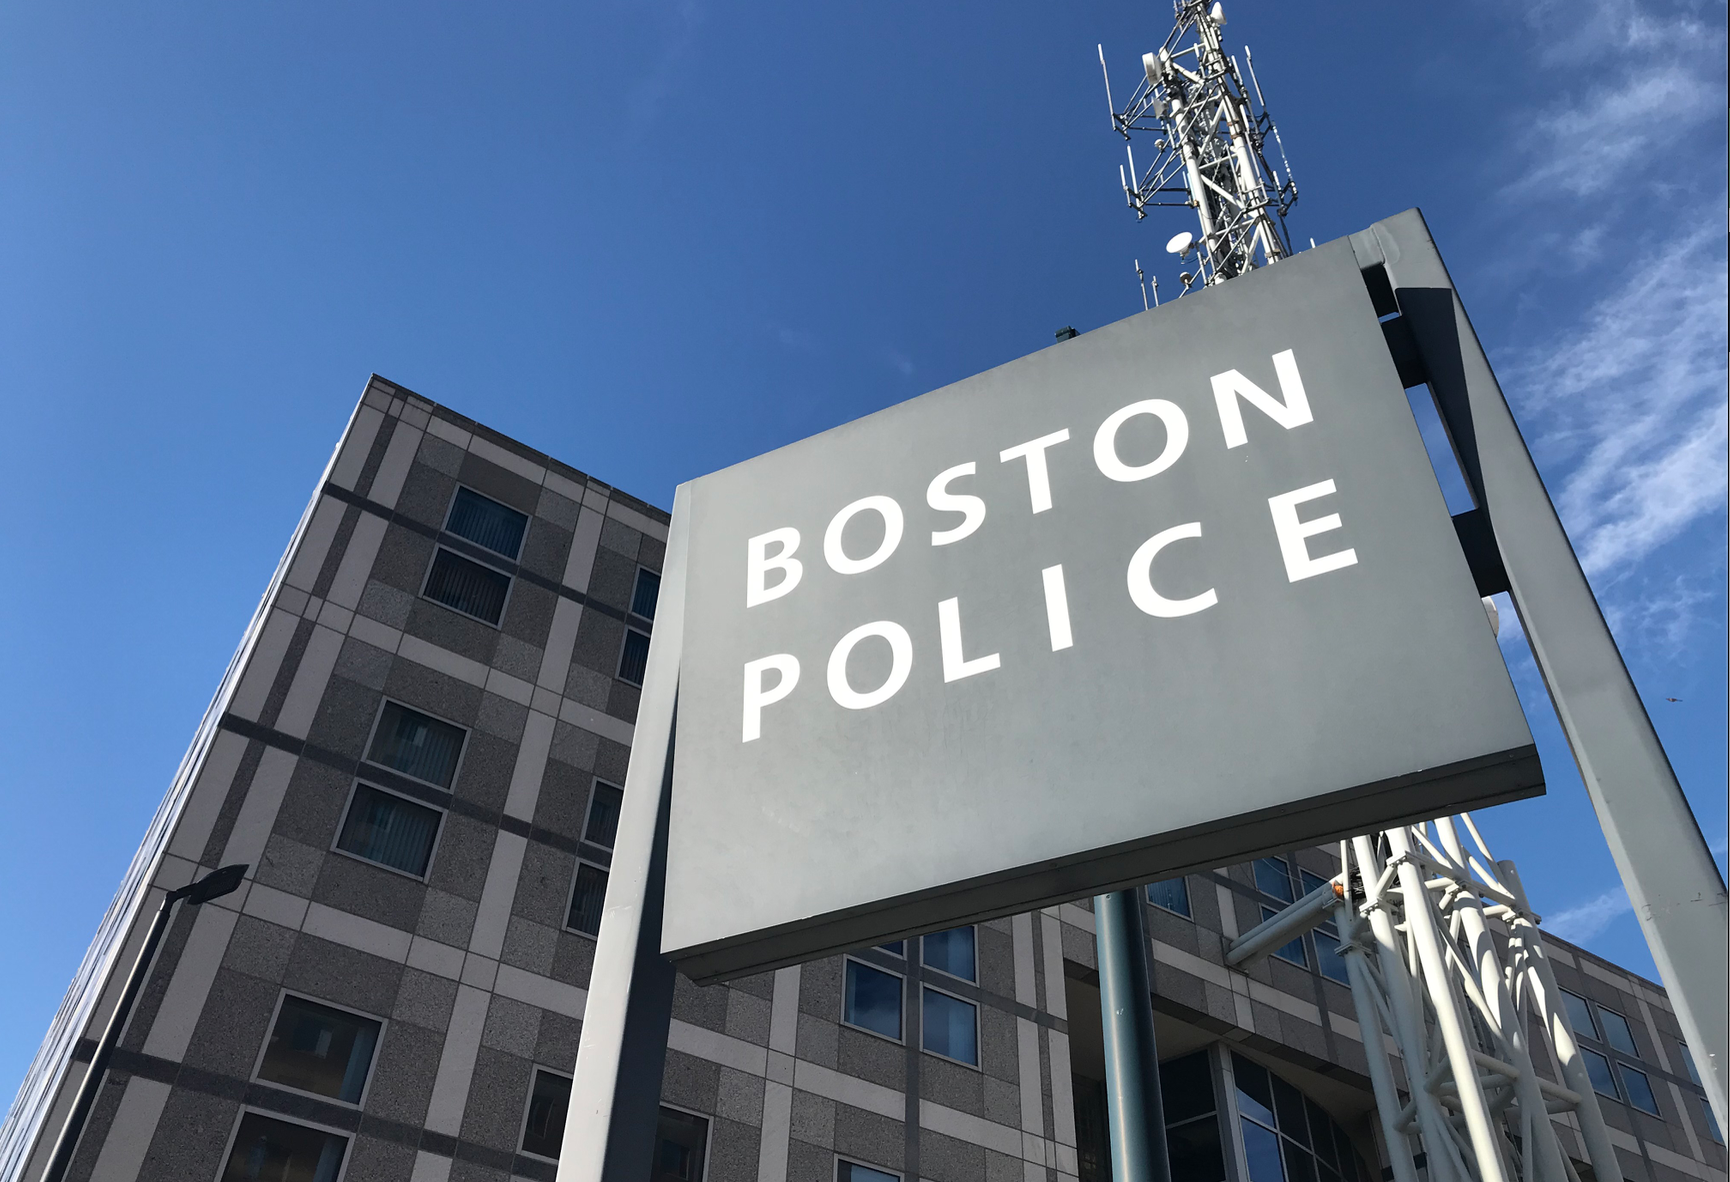 Boston police warn of spiked drinks, urge victims to report incidents -  